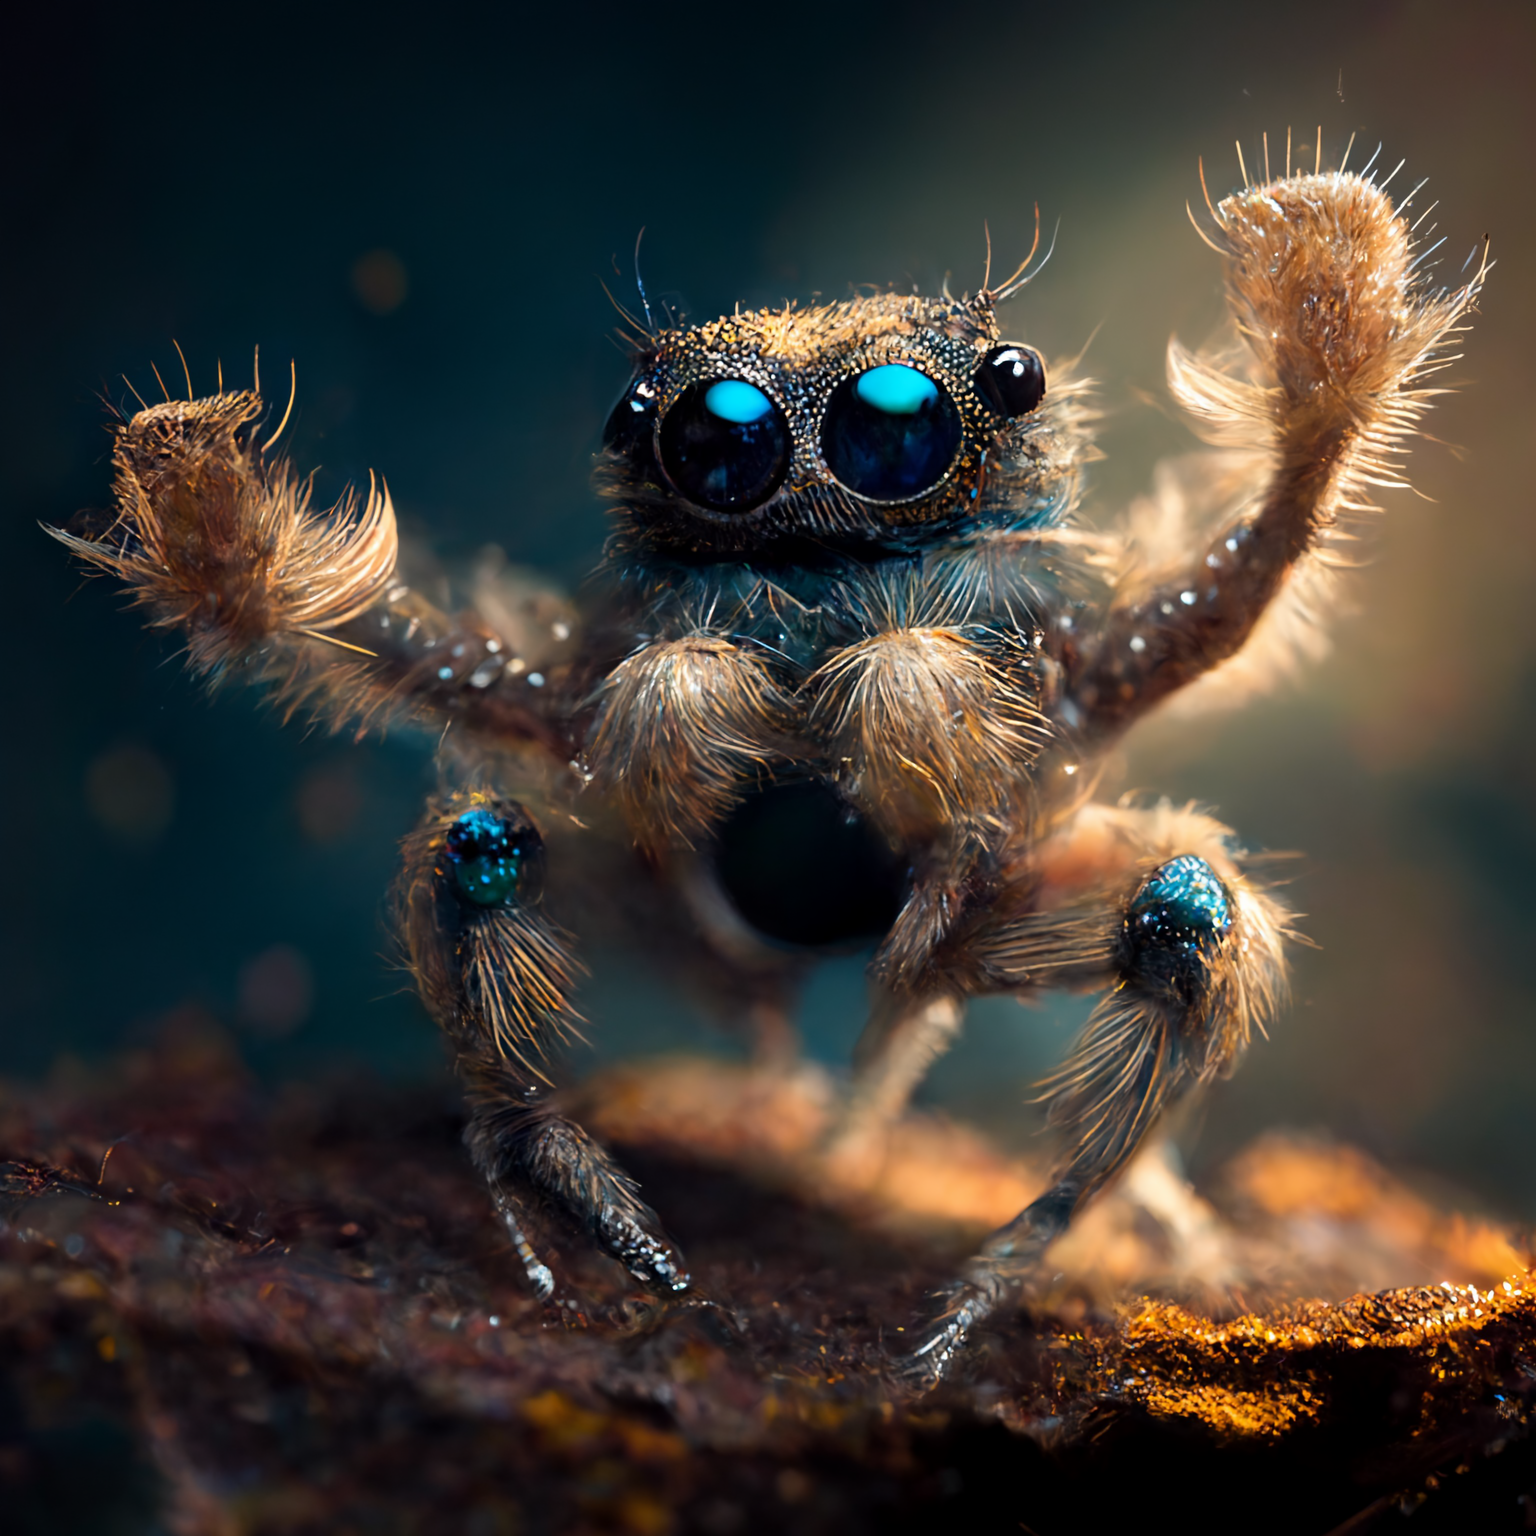 Love is in the Air: The Intricate Mating Behaviors of the Regal Jumping Spider